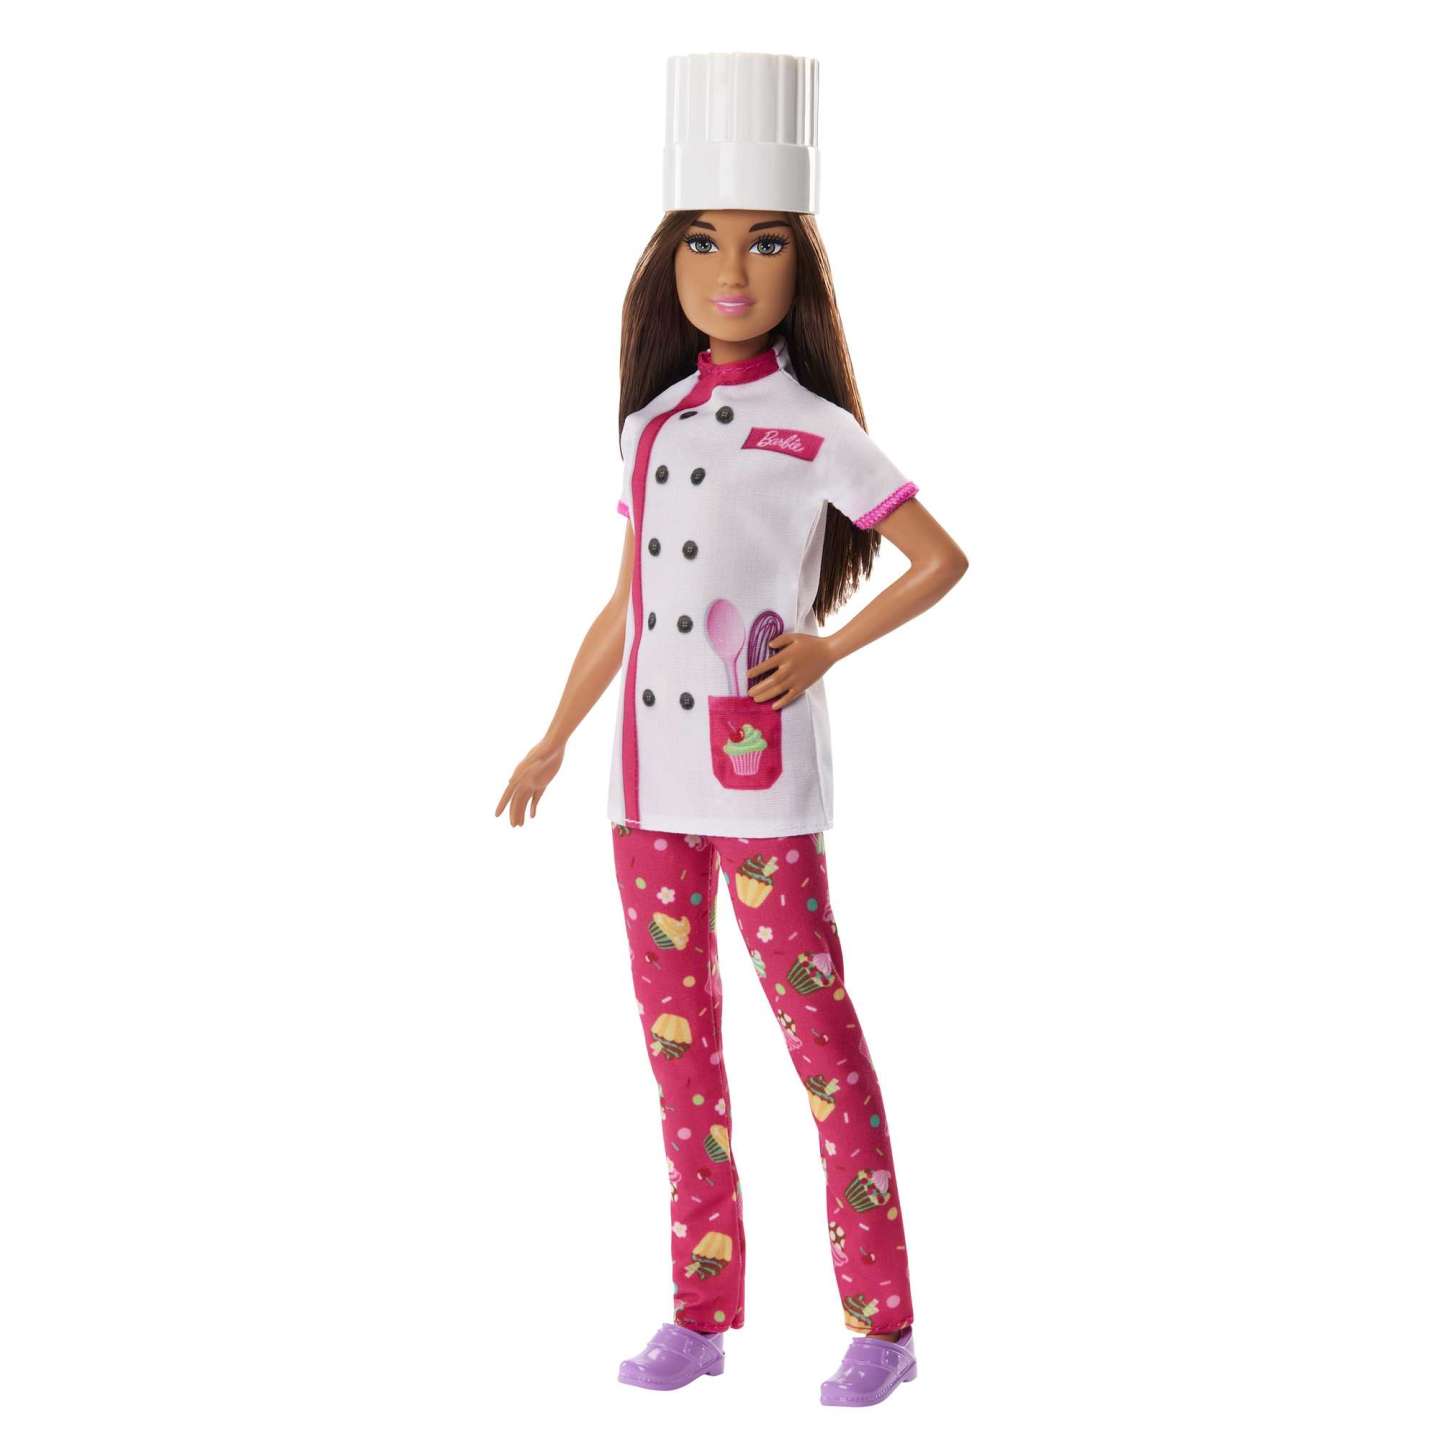 Barbie - Career Doll & Accessories Wearing Professional Outfits (Styles Vary)